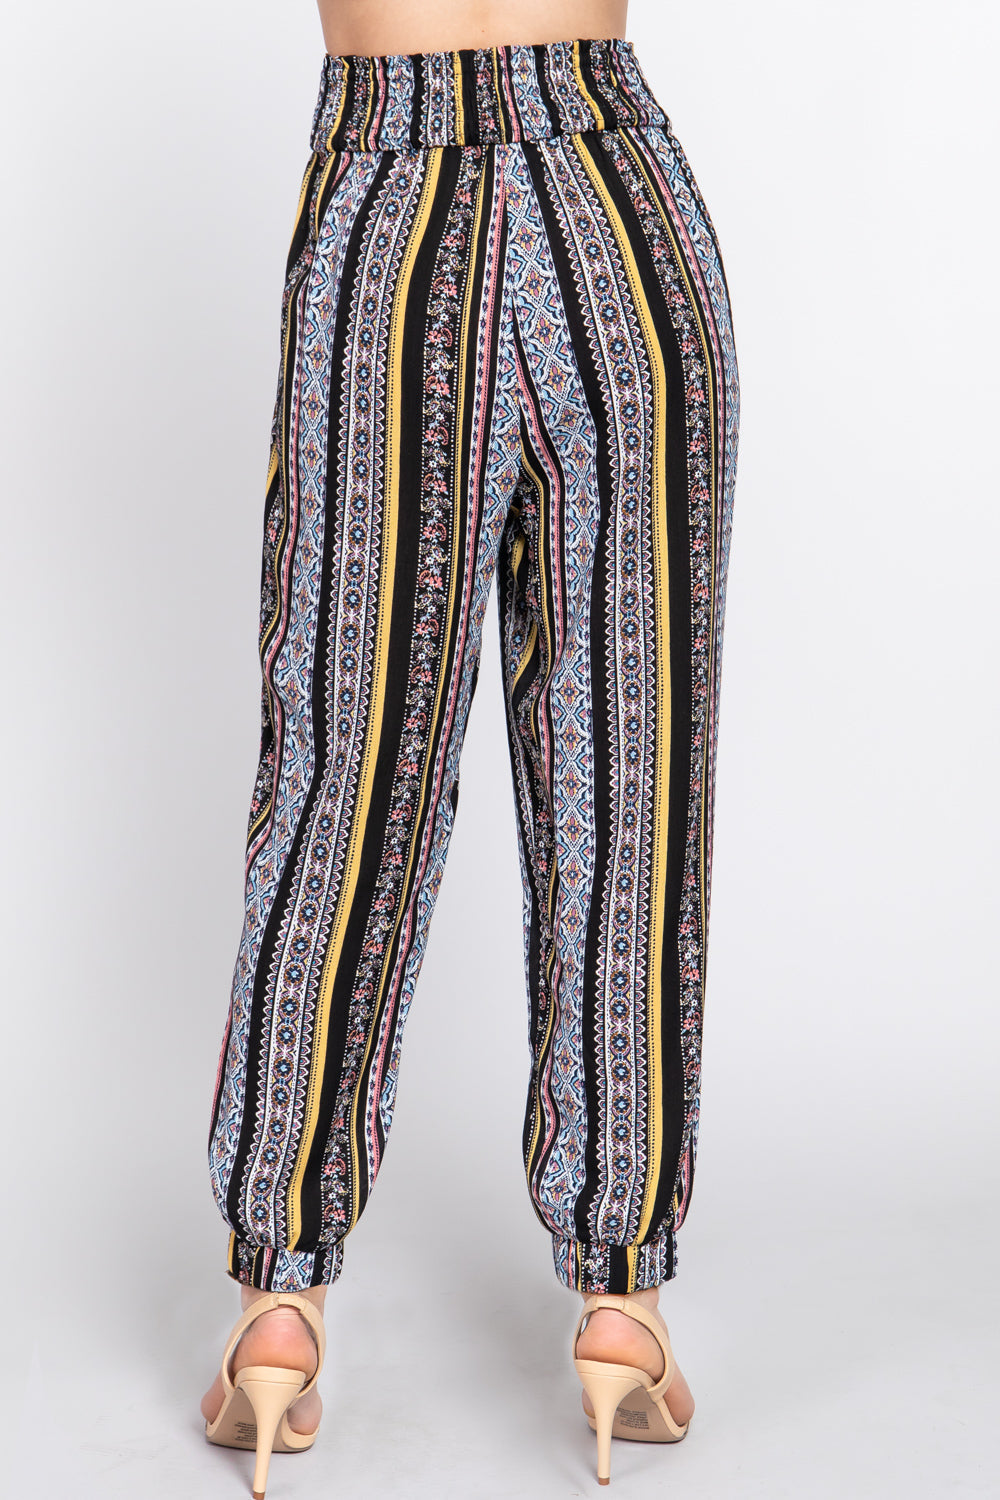 MUSTARD BLACK - Printed Jogger Pants - 2 styles - Ships from The US - womens joggers at TFC&H Co.